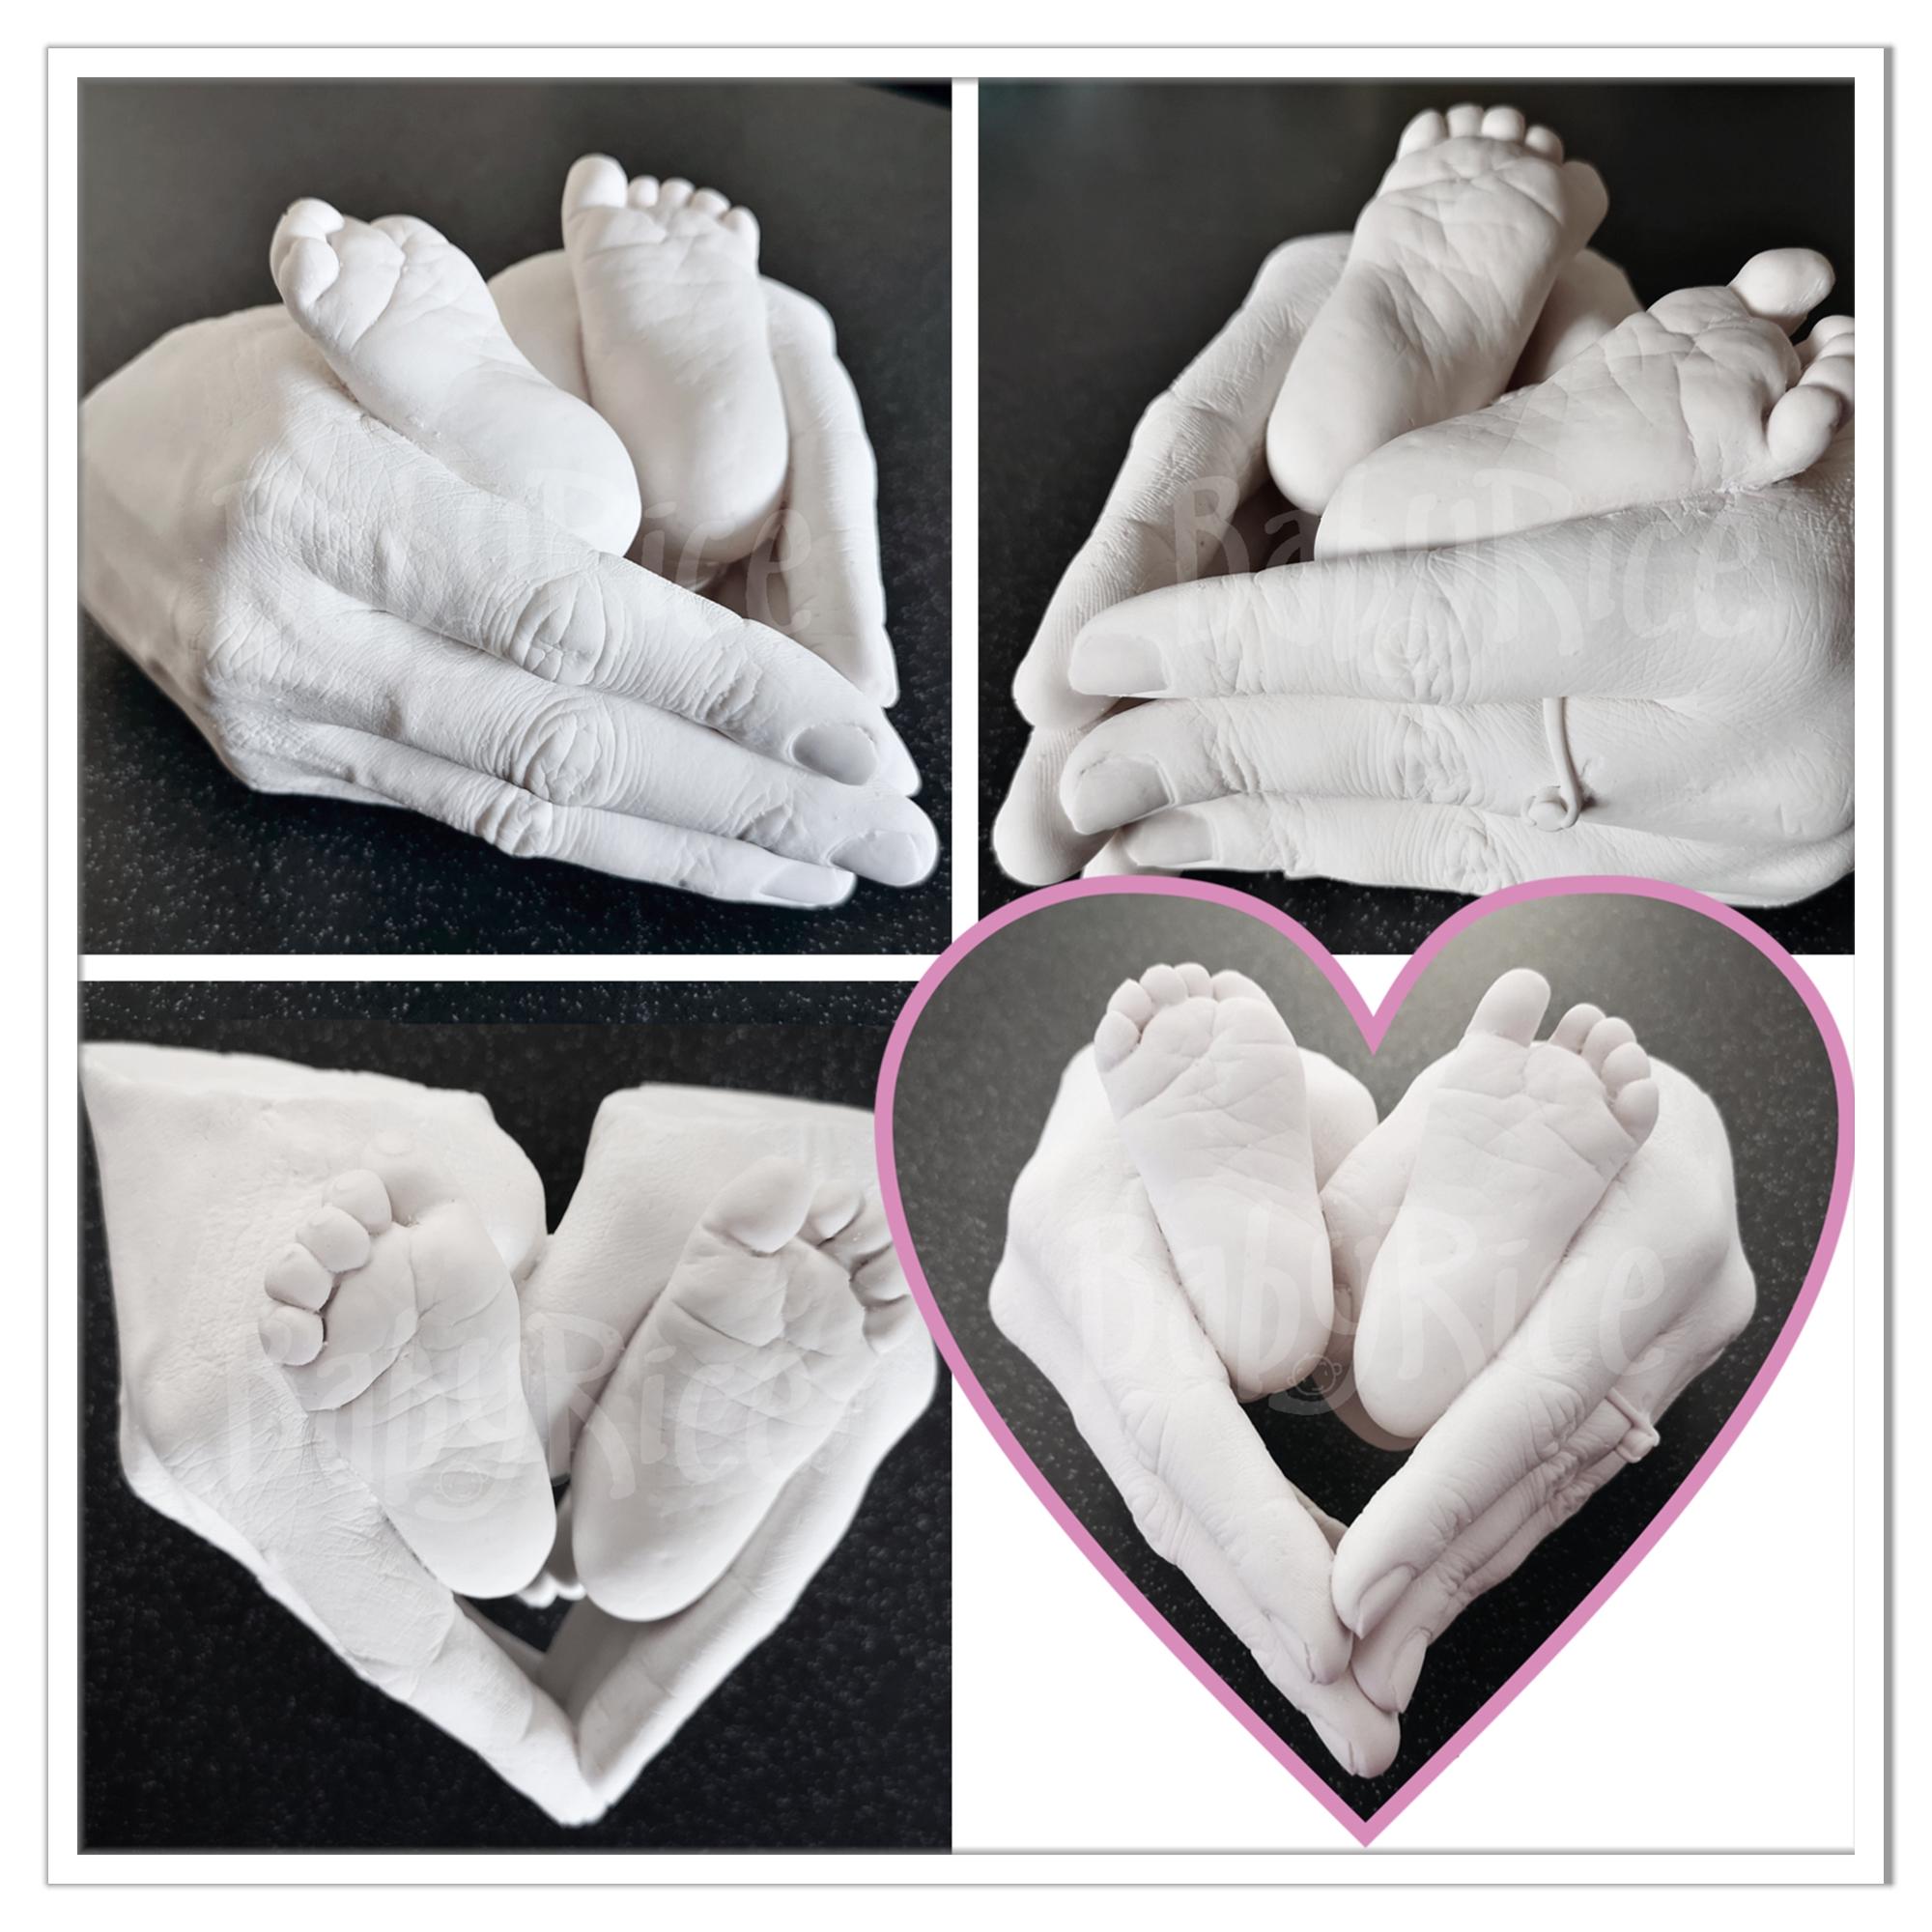 BabyRice's Customer Photo Gallery of 3D Hand Cast and Family Castings